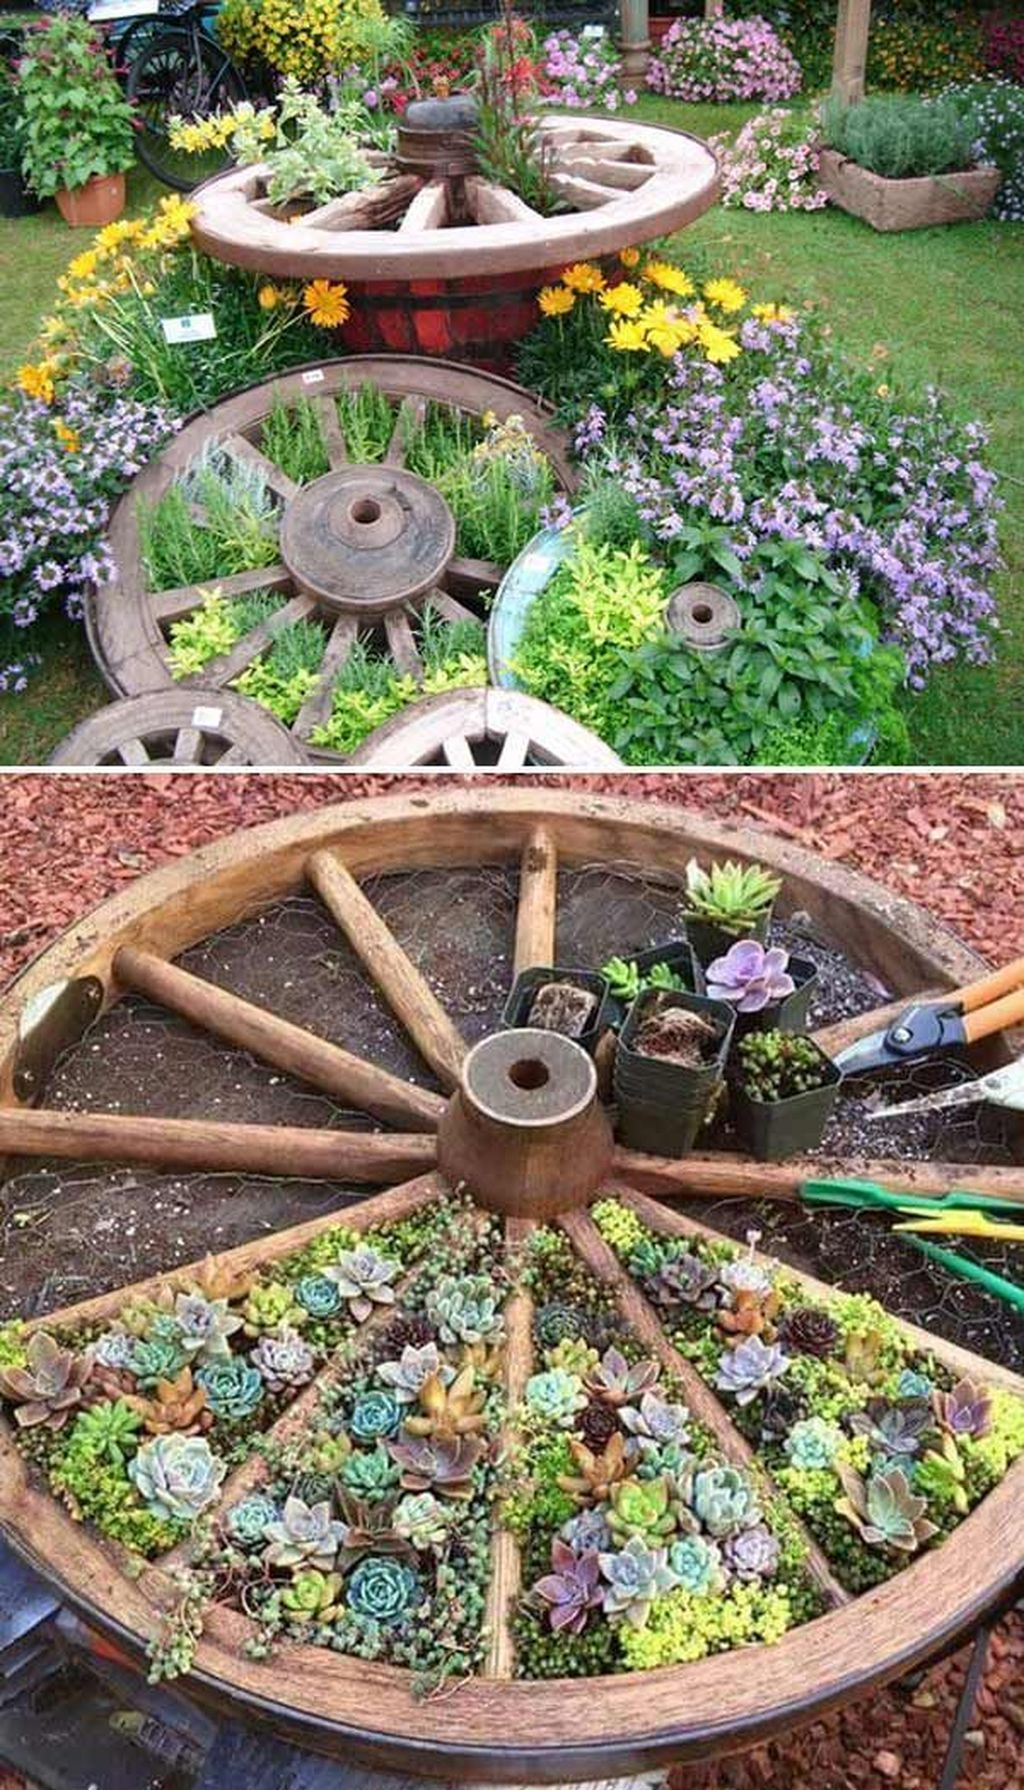 48 Creative Gardening Design Ideas On A Budget To Try - BESTHOMISH